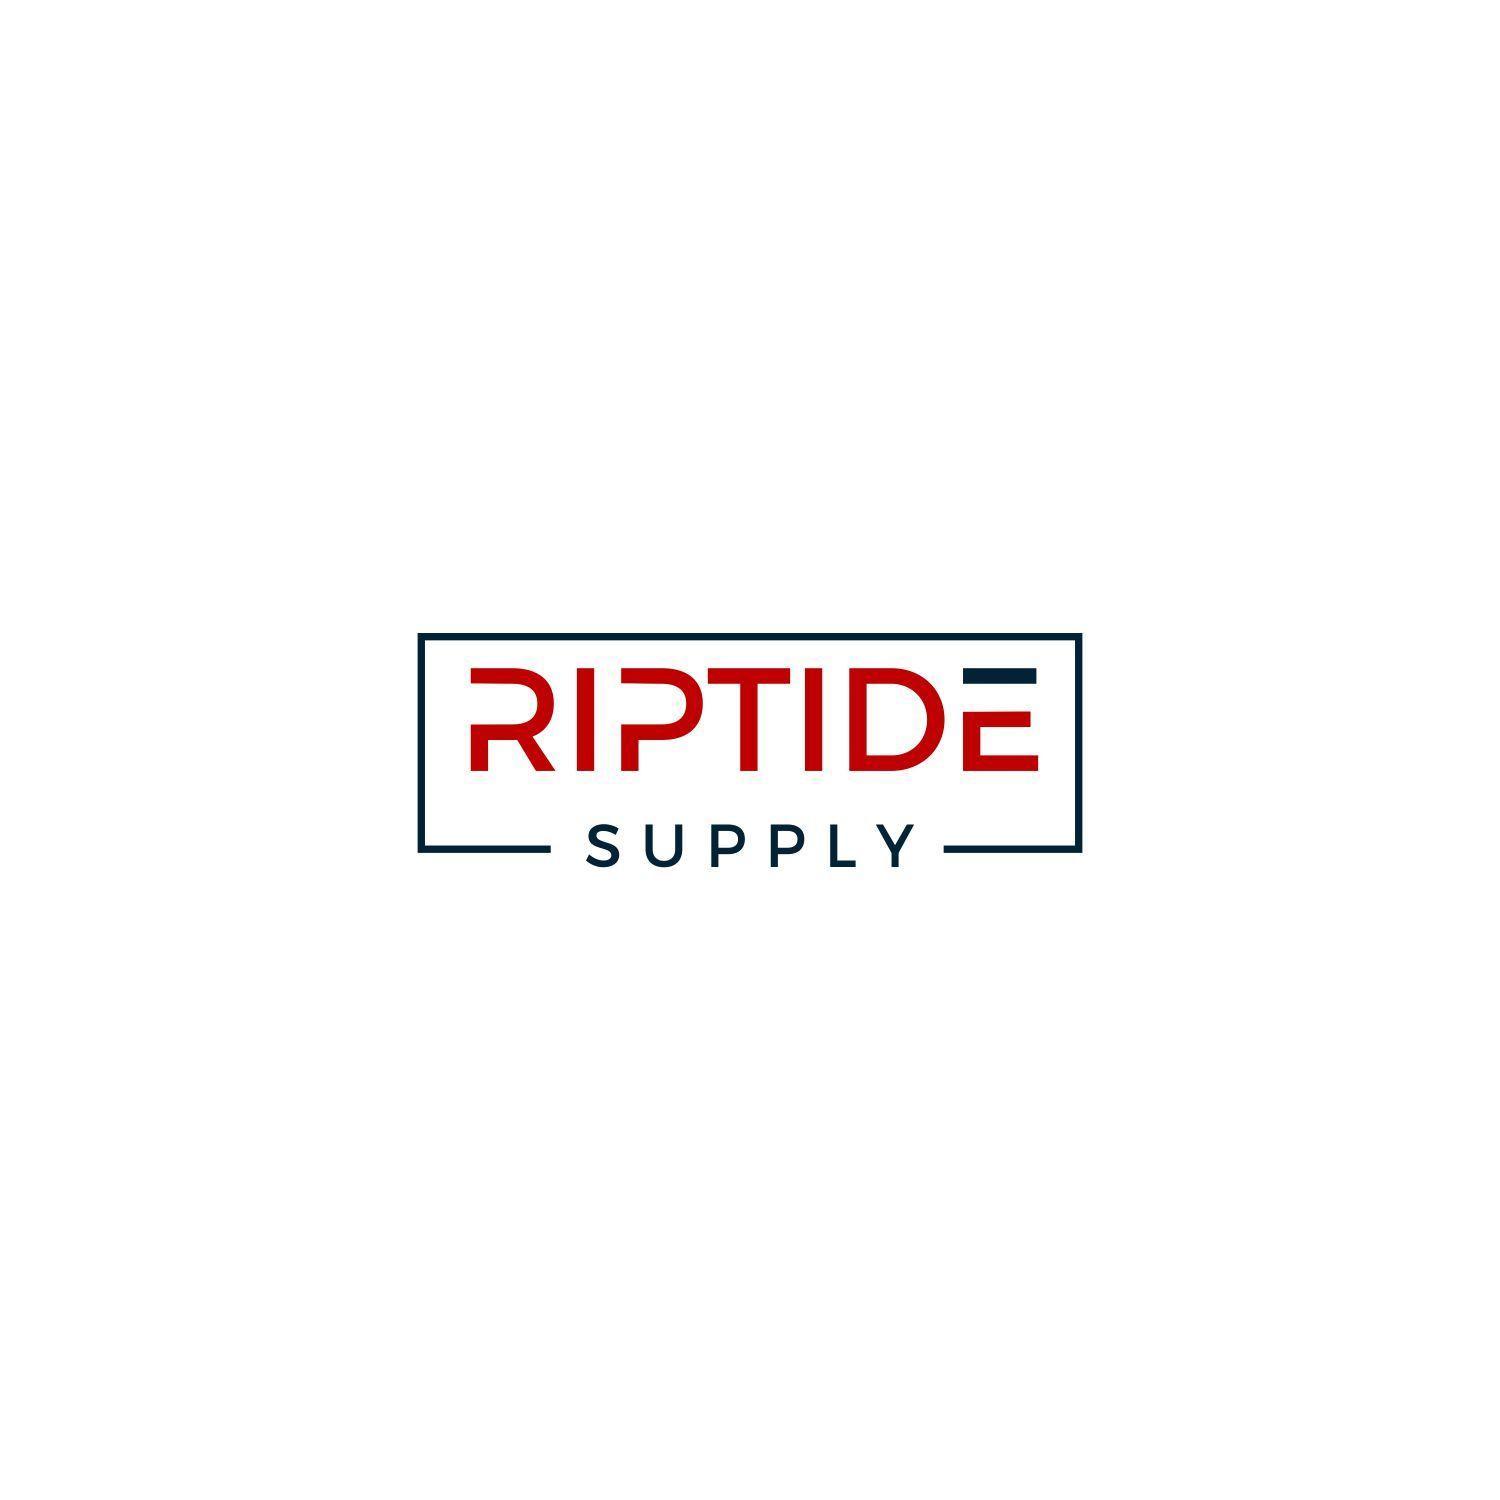 Riptide White Logo - Professional, Serious, Business Logo Design for RipTide Supply by ...